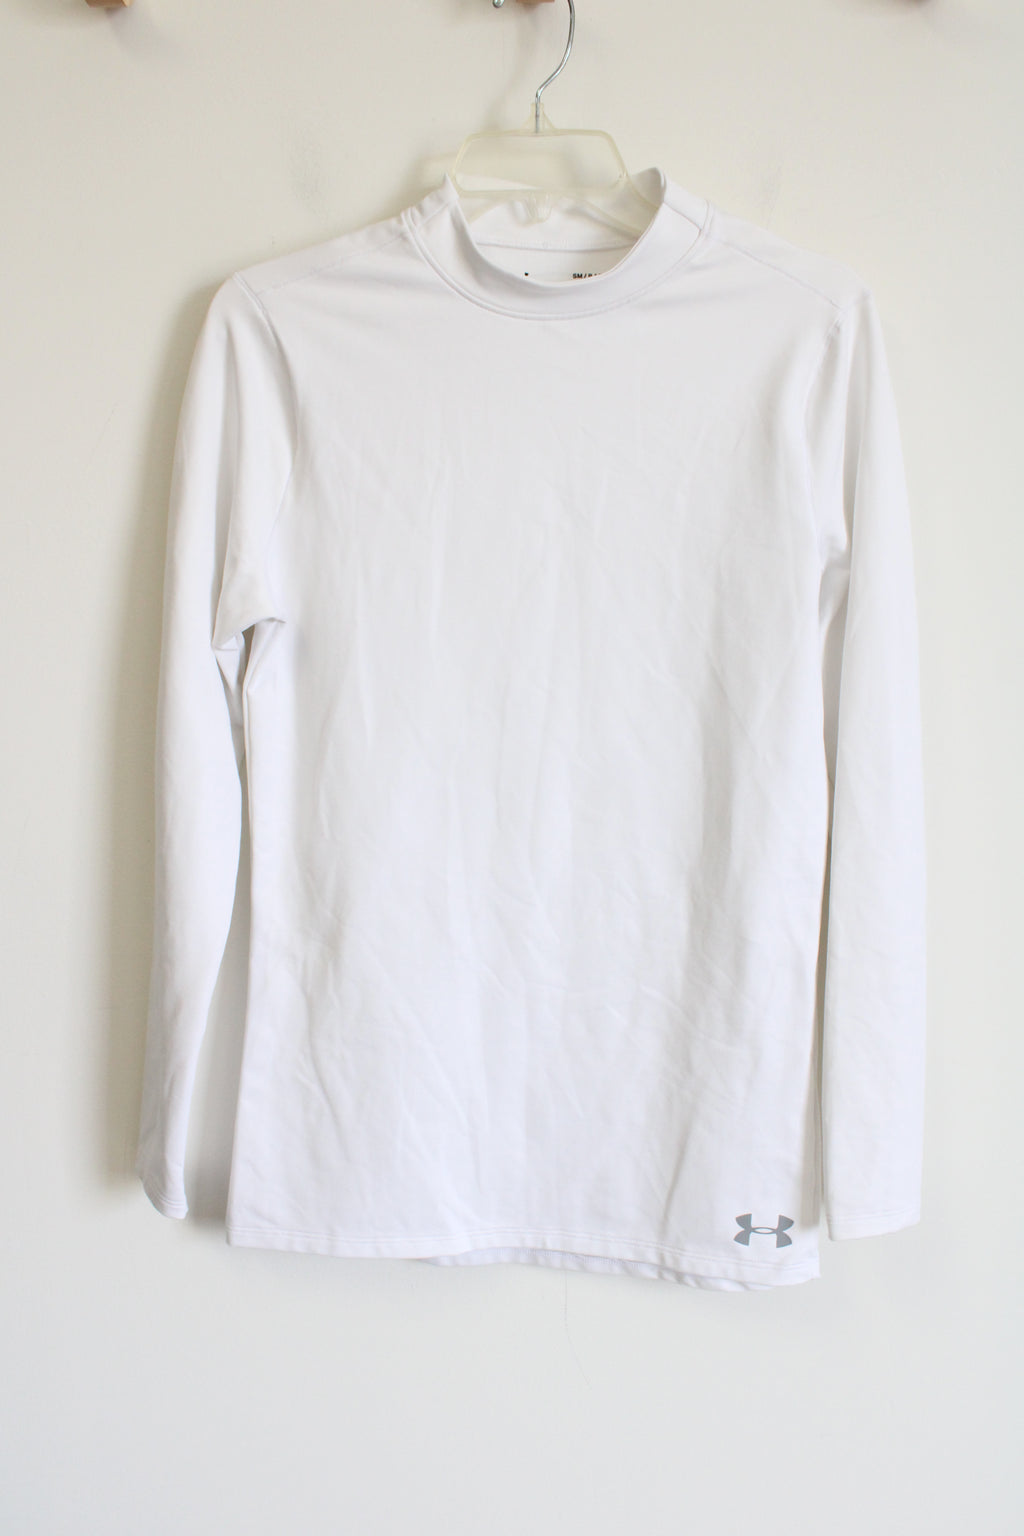 Under Armour White Cold Gear Fitted Long Sleeved Shirt | S